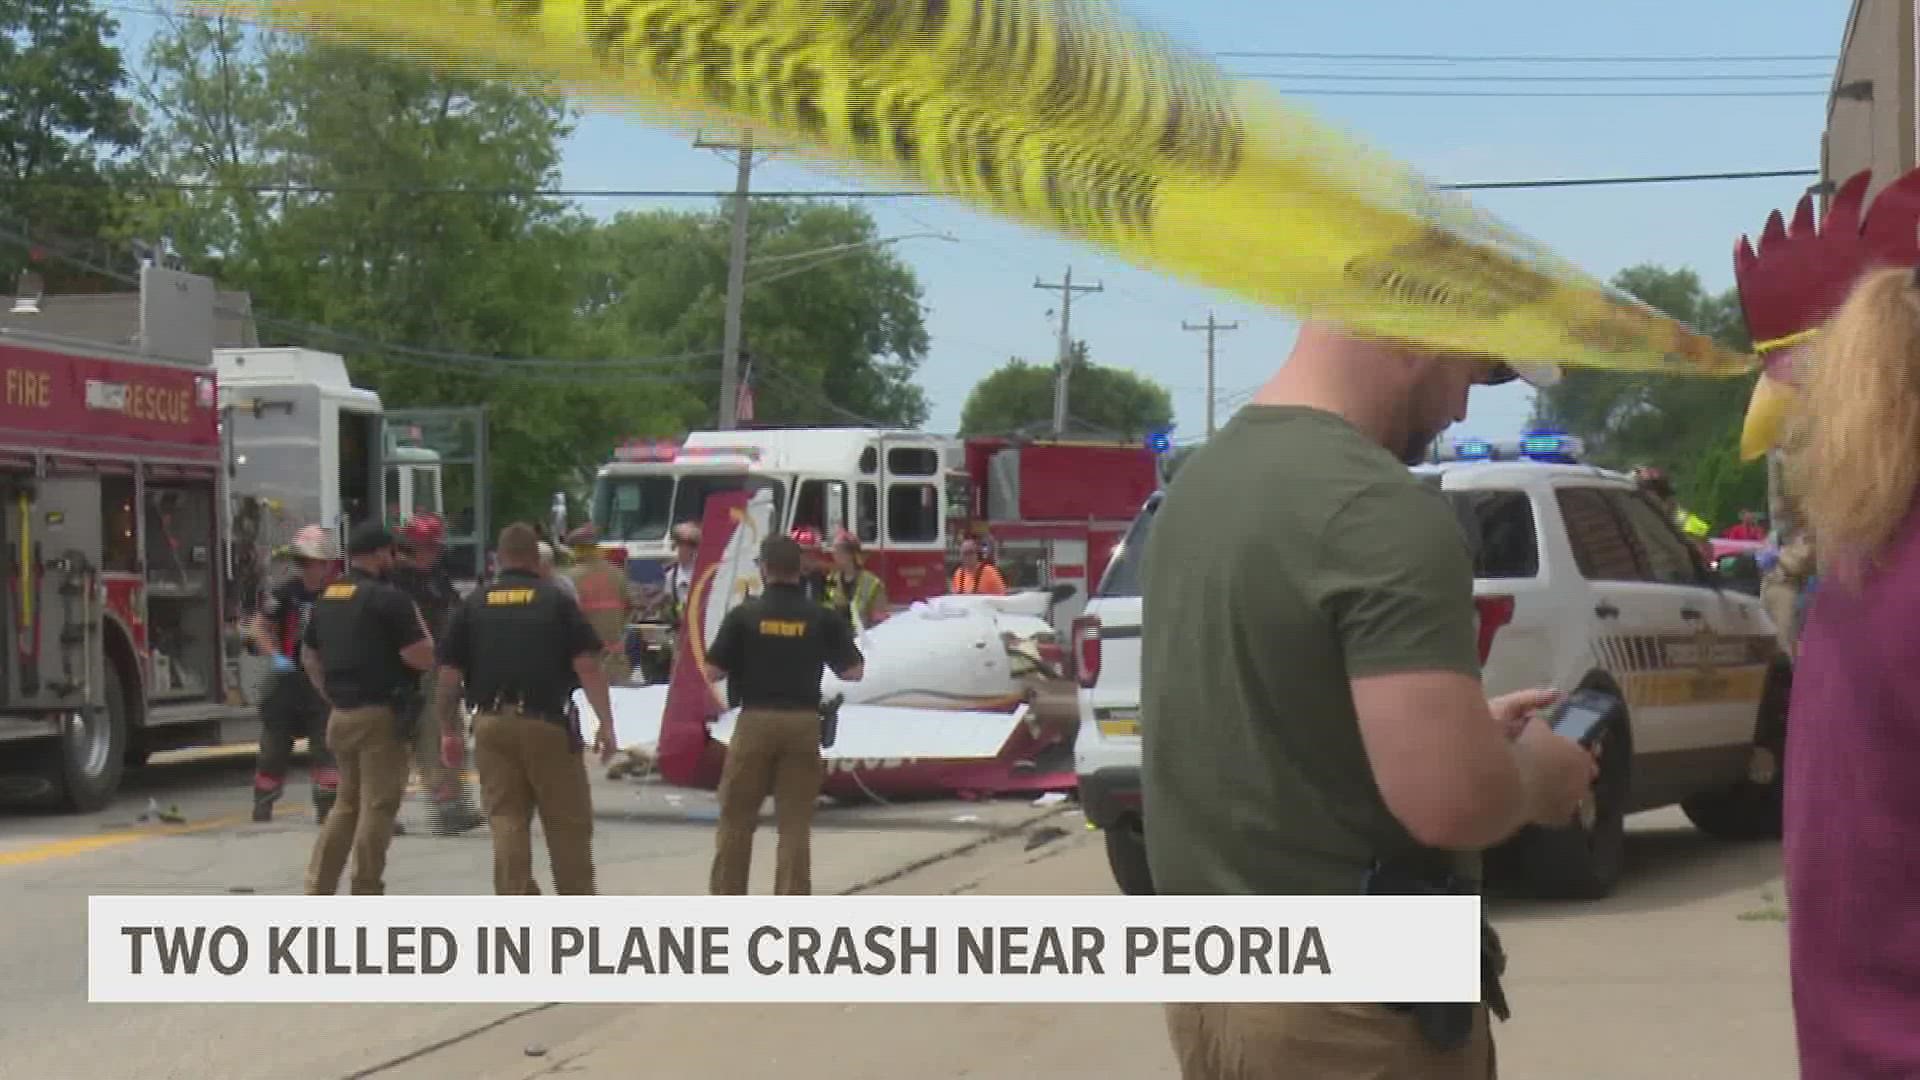 Witnesses said the small plane was having trouble while flying and tried to land on a street Saturday in the Village of Hanna City.